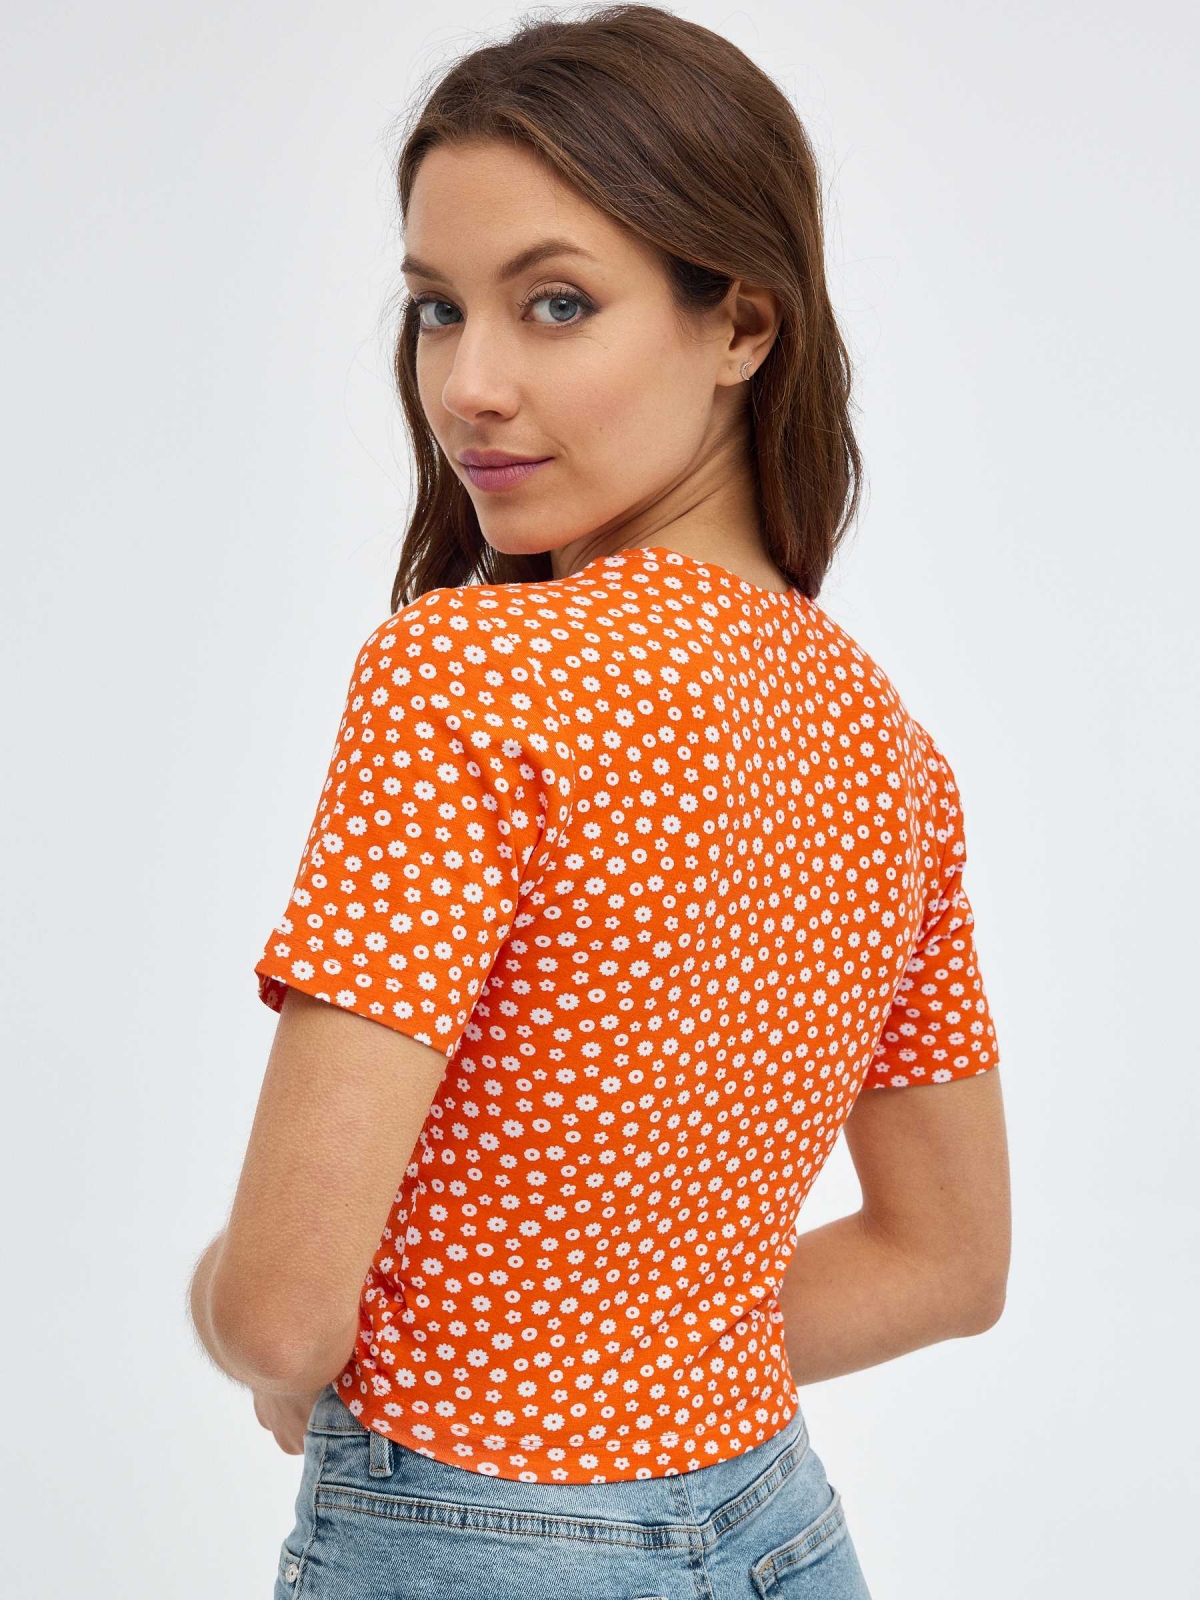 Polka-dot T-shirt with knot orange middle back view